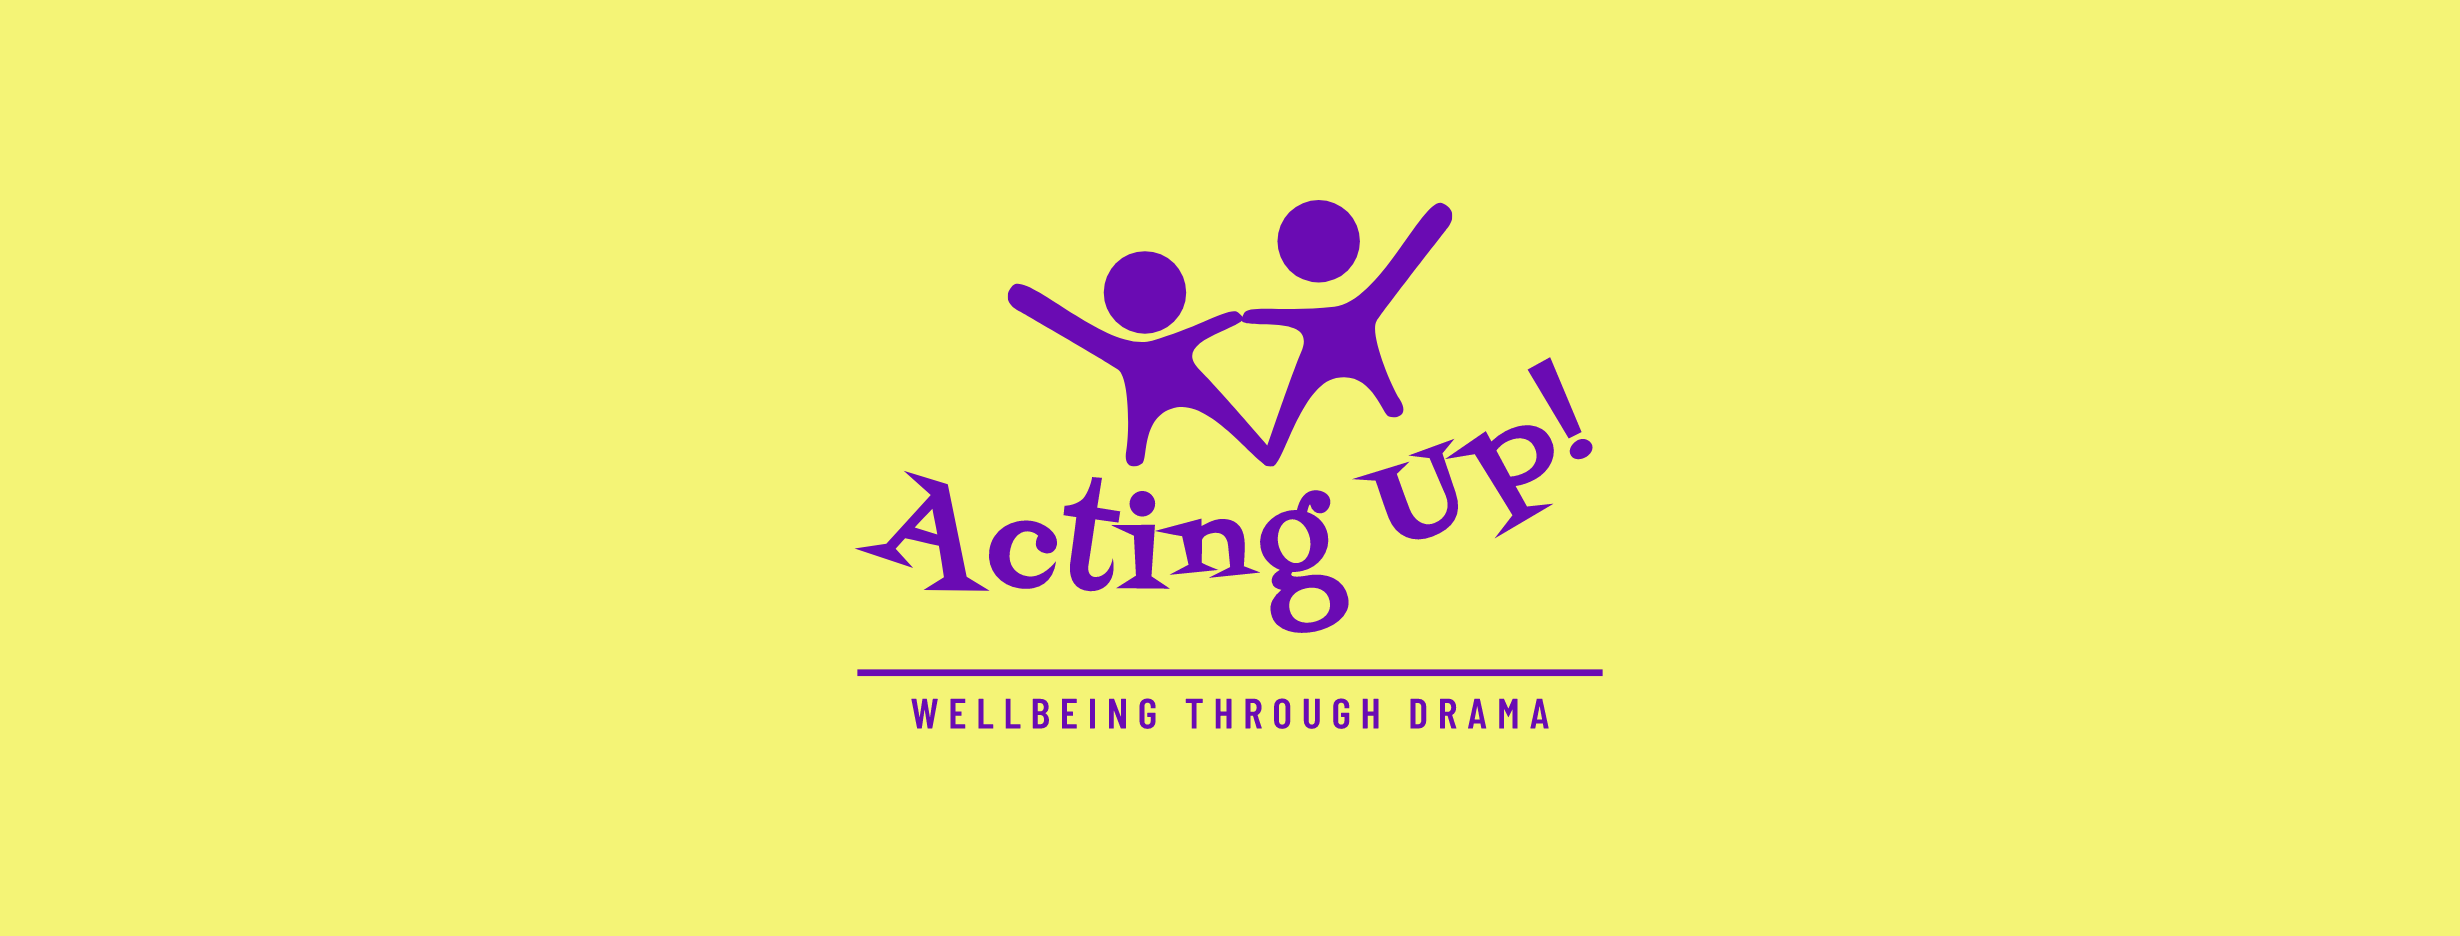 Acting Up! - 